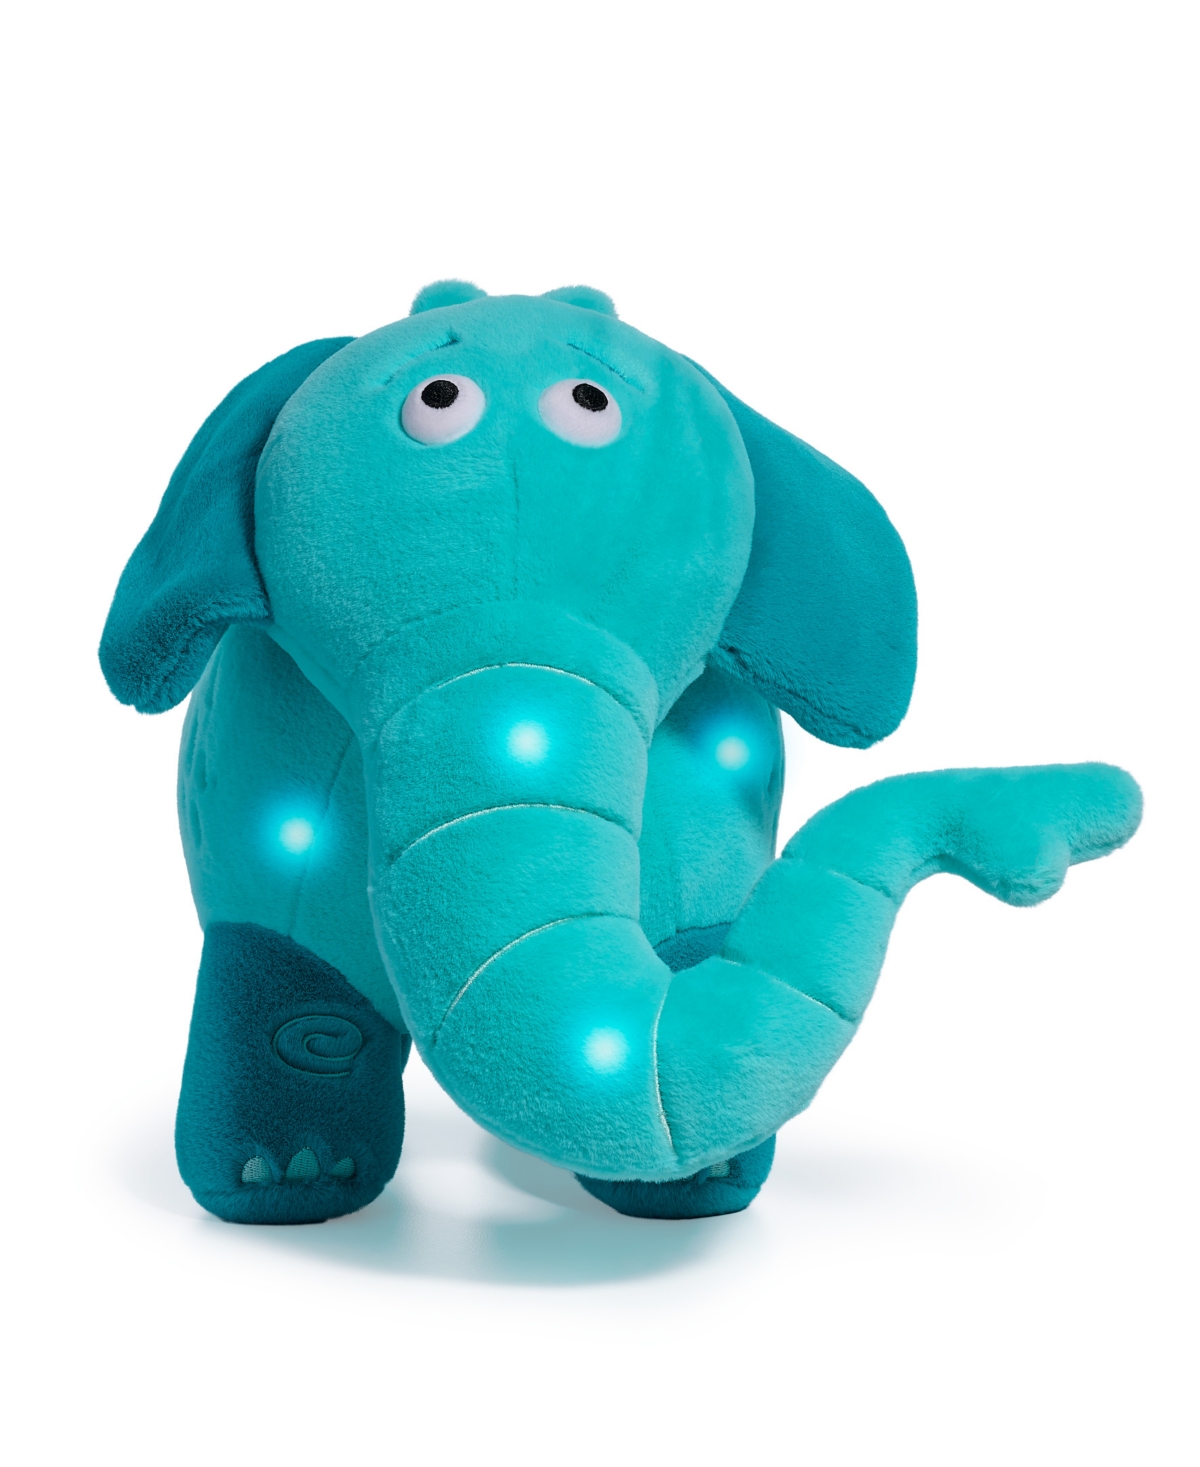 Shop Geoffrey's Toy Box 14" Toy Plush Led With Sound Elephant Buddies, Created For Macys In Turquoise,aqua